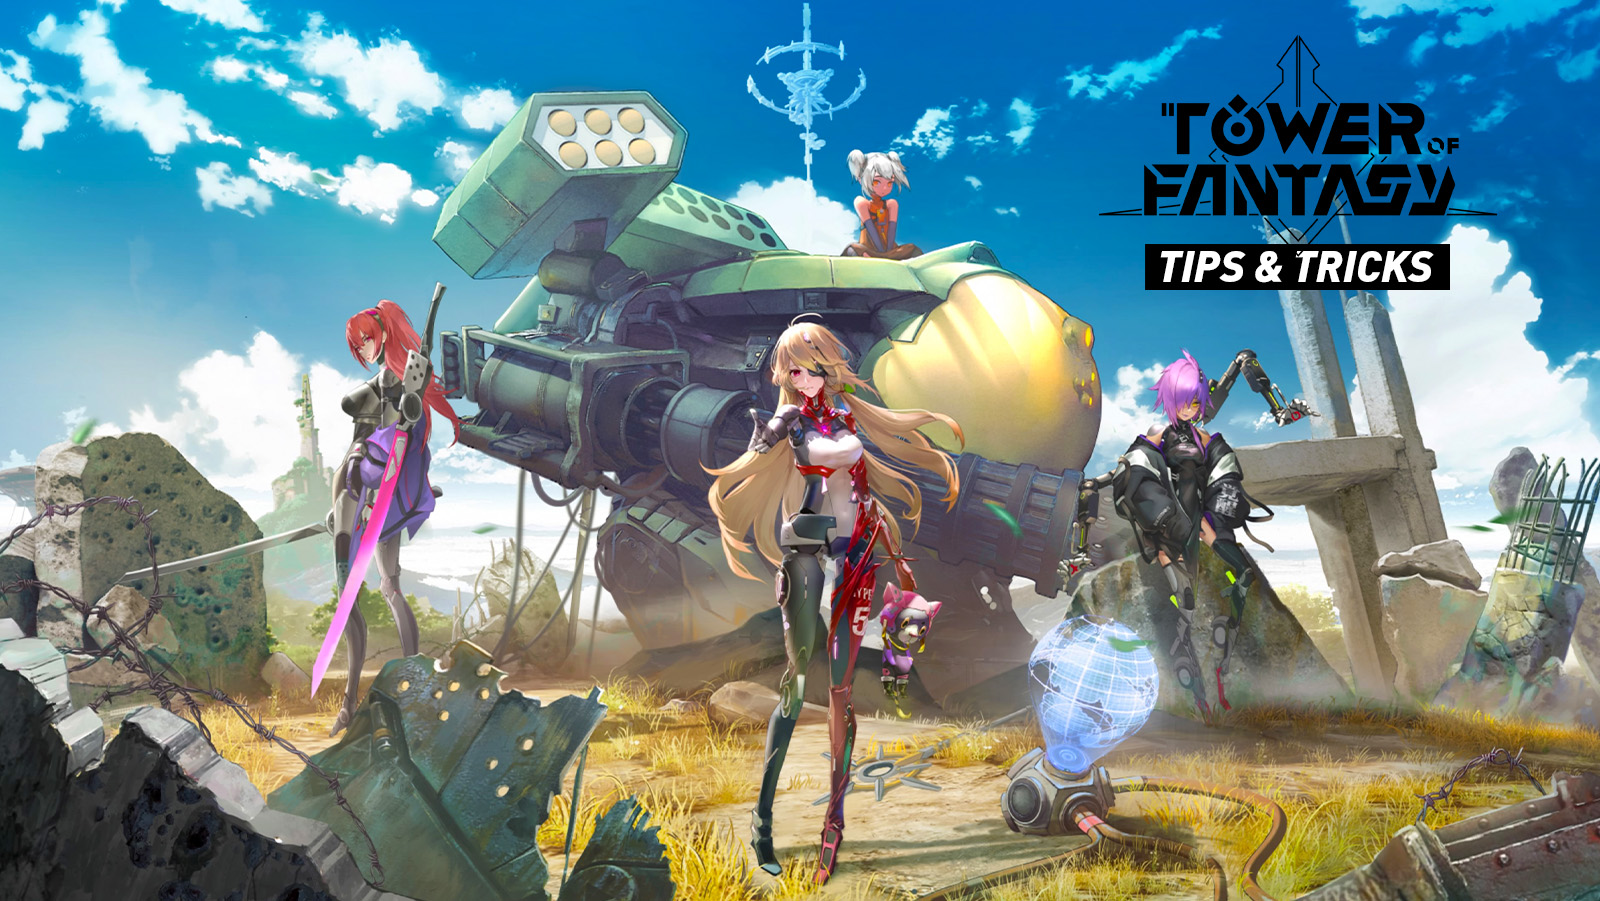 Tower of Fantasy Tips and Tricks